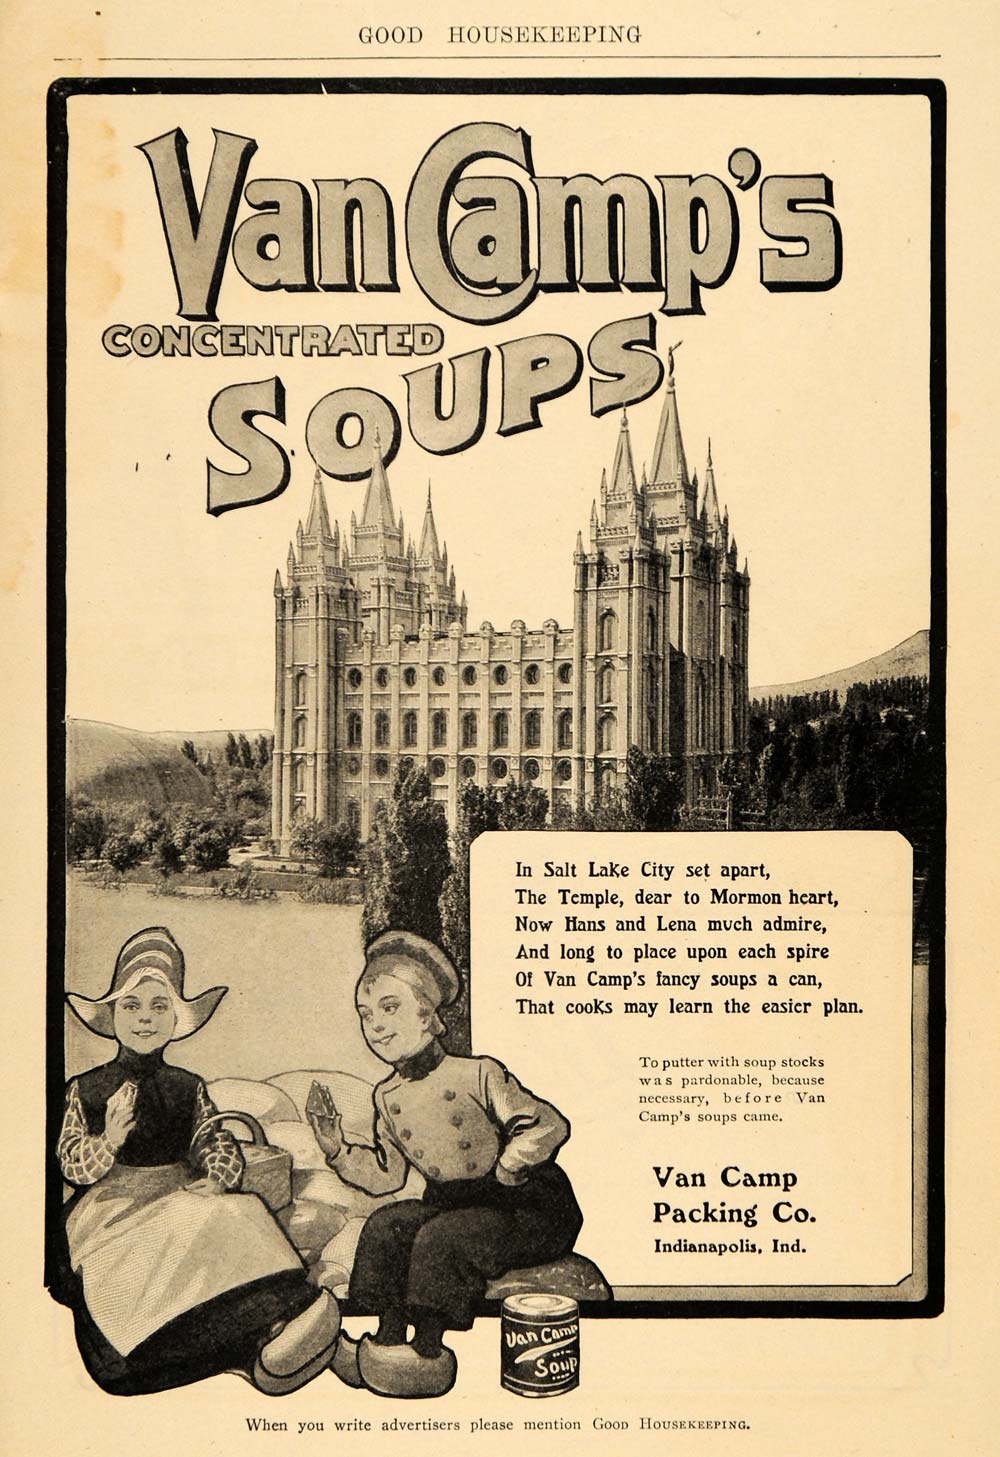 1904 Ad Van Camp's Packing Co. Soups Hans Lena Canned - ORIGINAL ADVERTISING GH3